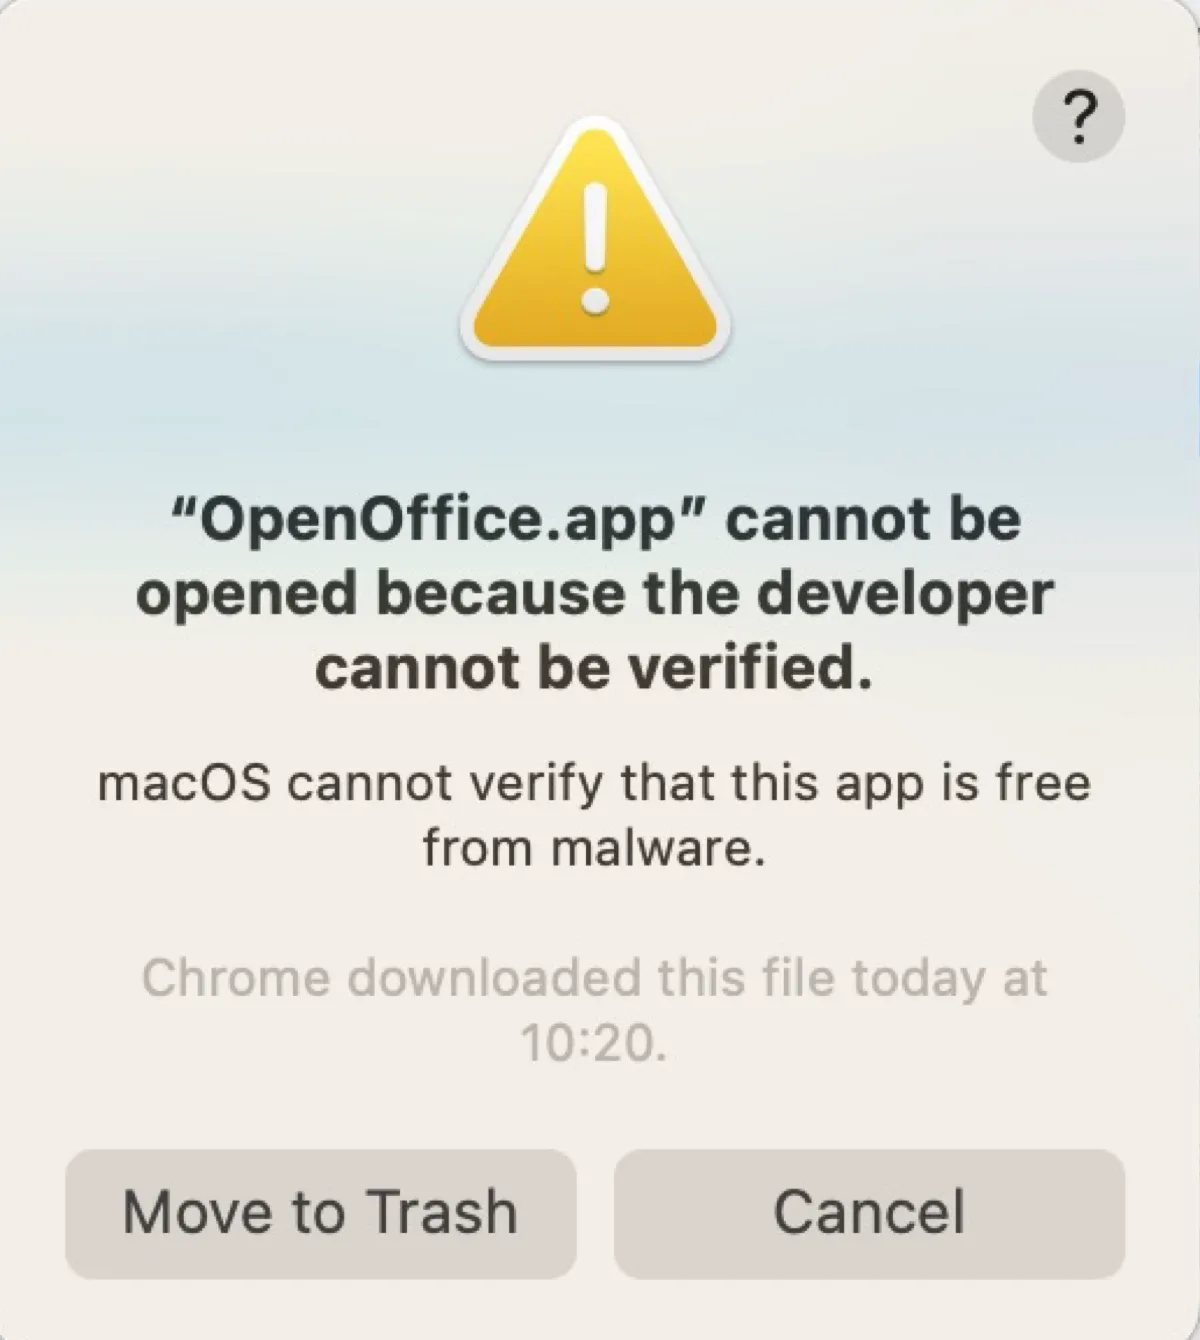 The error saying App cannot be opened because the developer cannot be verified